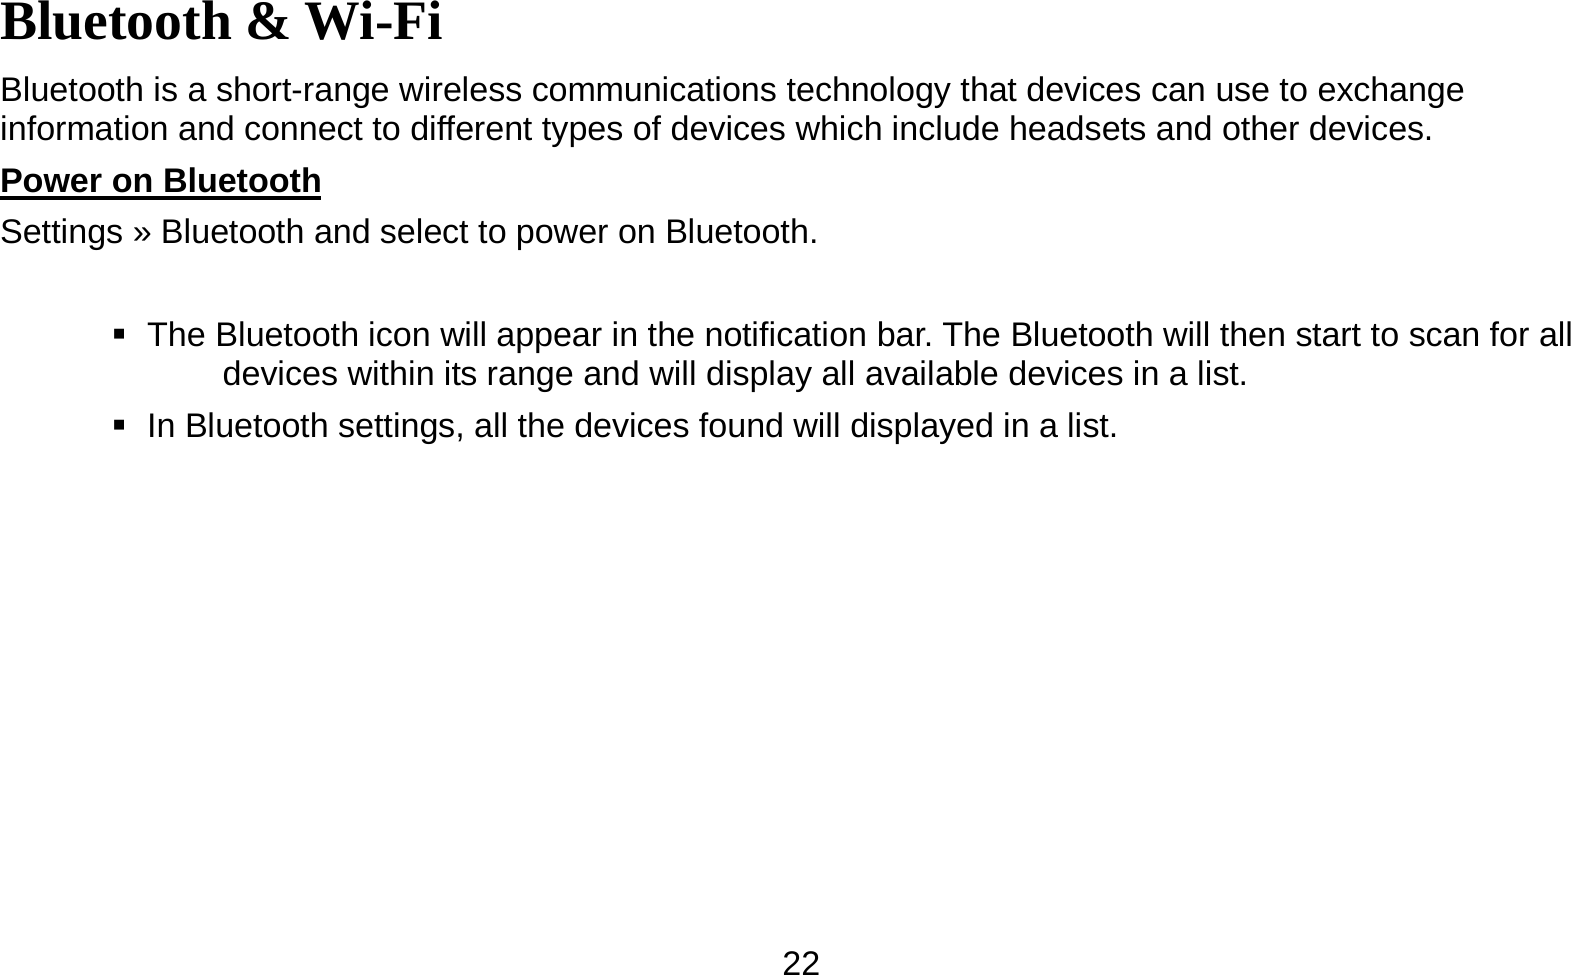   22Bluetooth &amp; Wi-Fi Bluetooth is a short-range wireless communications technology that devices can use to exchange information and connect to different types of devices which include headsets and other devices. Power on Bluetooth                                                                                Settings » Bluetooth and select to power on Bluetooth.     The Bluetooth icon will appear in the notification bar. The Bluetooth will then start to scan for all devices within its range and will display all available devices in a list.    In Bluetooth settings, all the devices found will displayed in a list.  